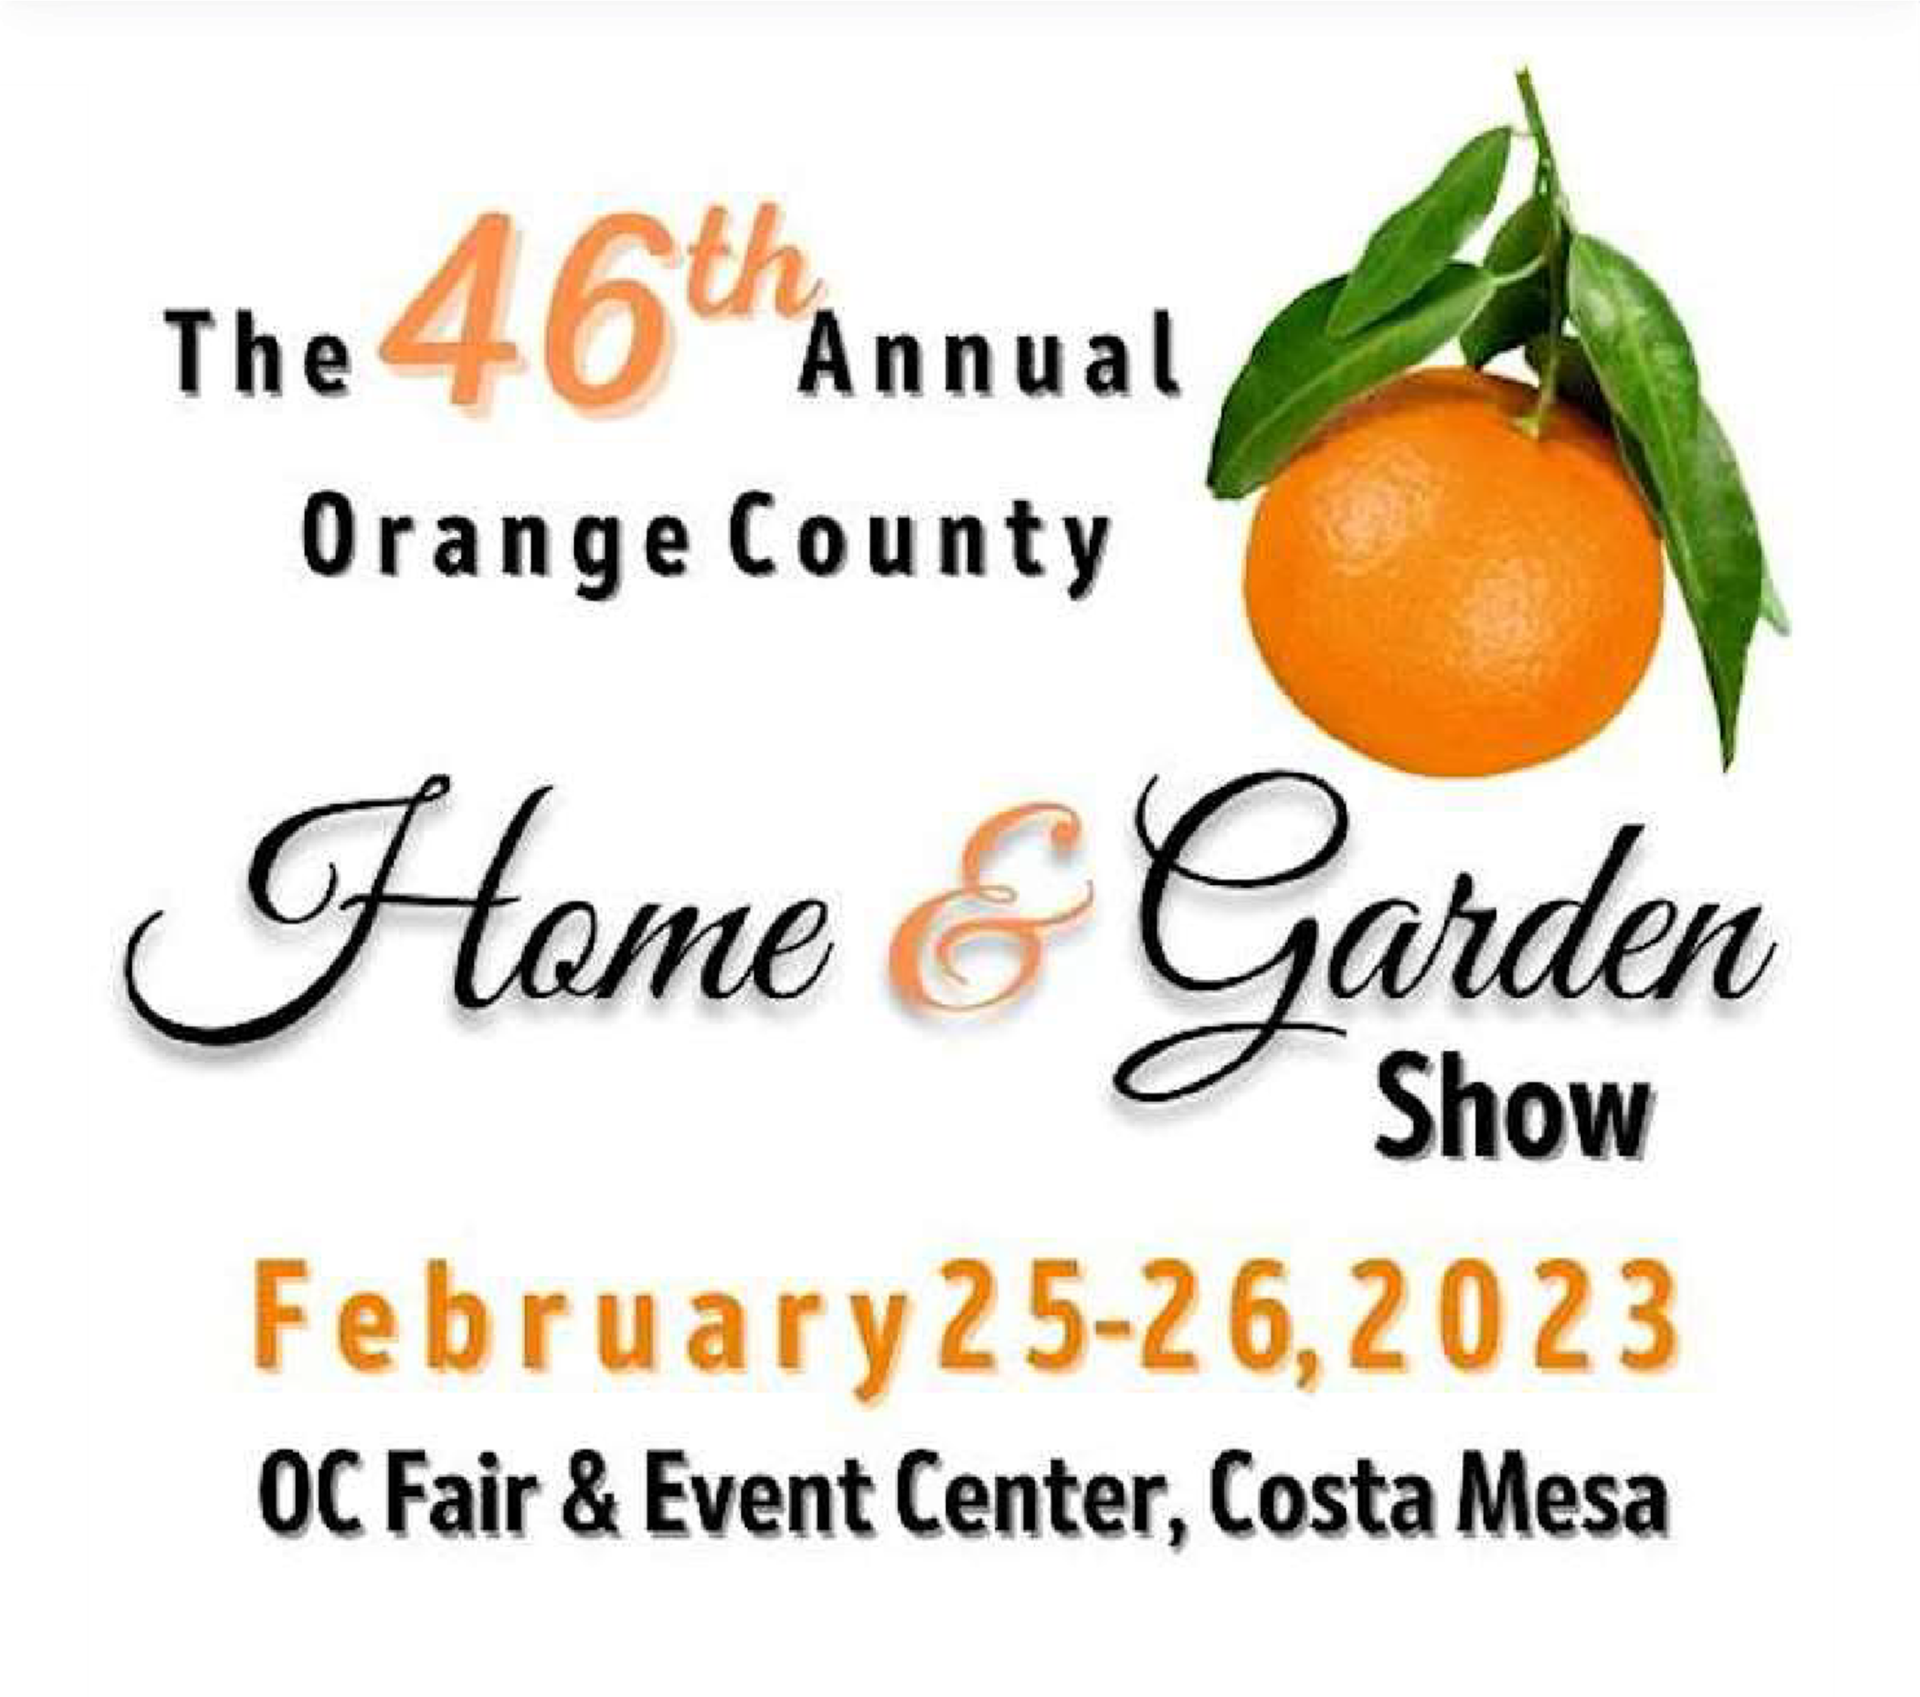 Save This Date To Join Us at OC Home & Garden Show & Giving Pavilion